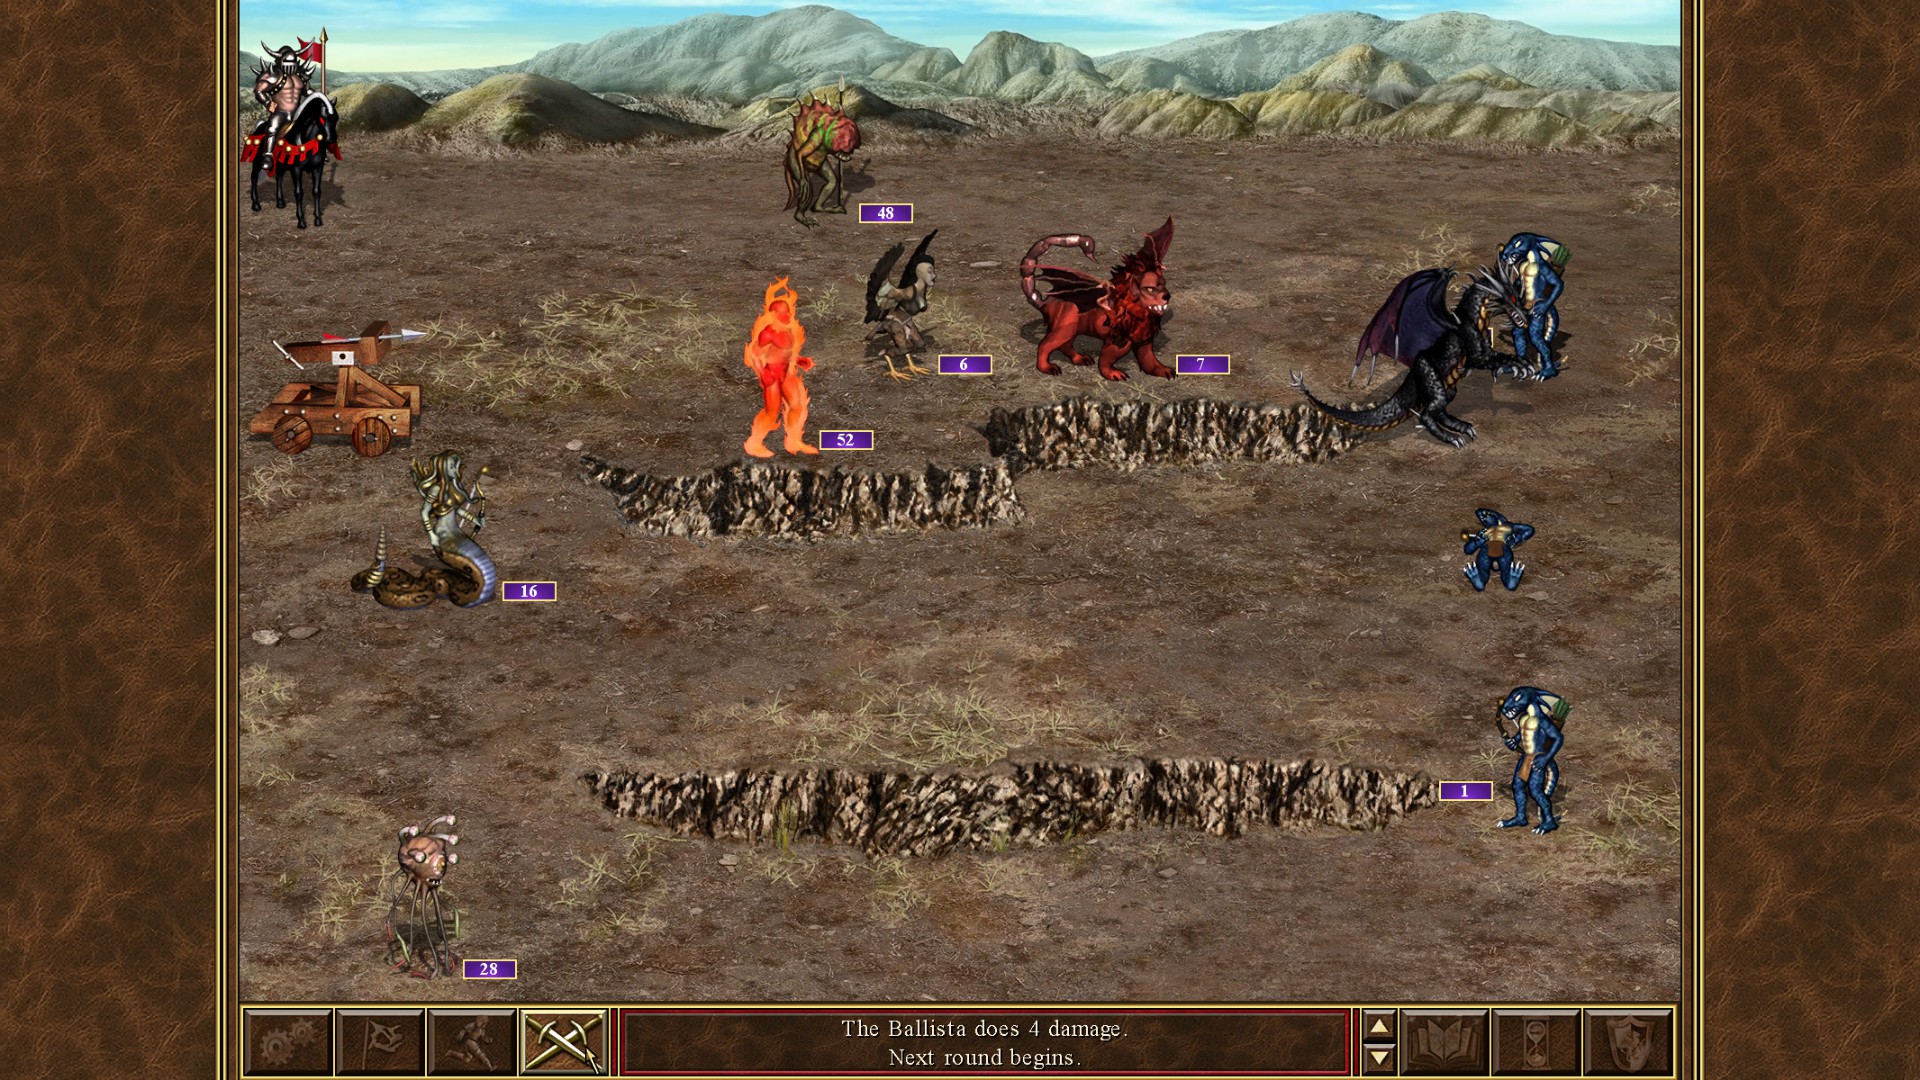 download heroes of might and magic 2 free